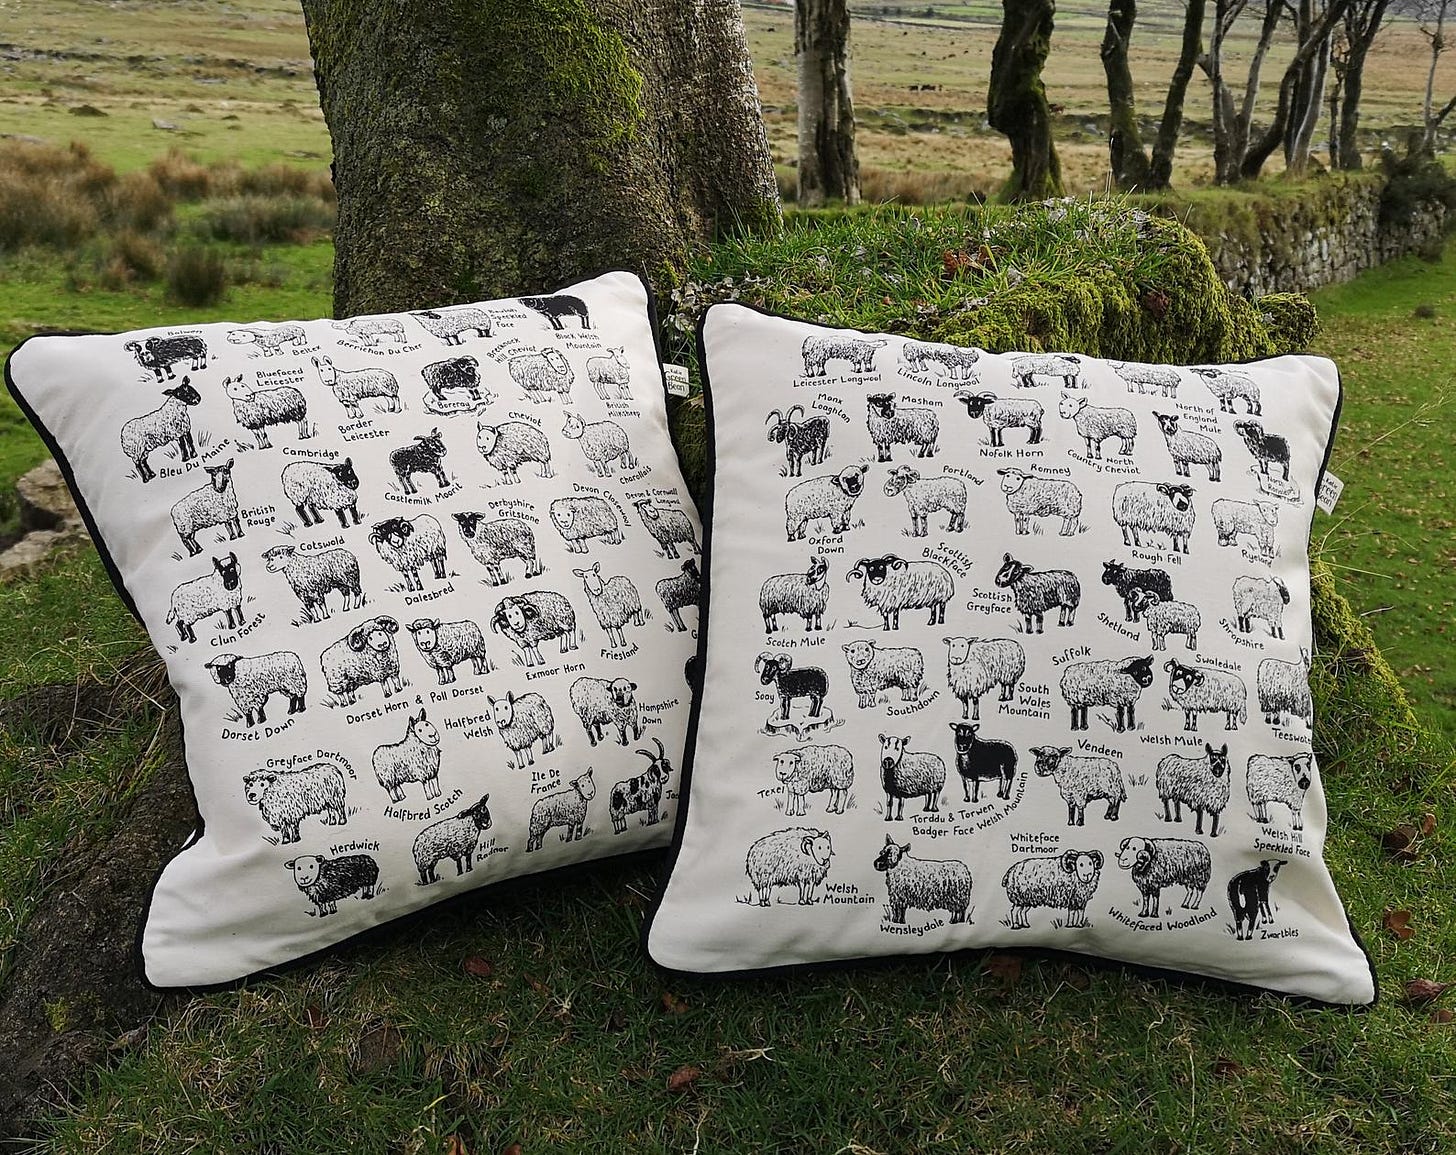 Two cushions sit side by side on a grassy bank at the foot of a tree. The cushions are cream with black piping, and black illustrations of sheep arranged in alphabetical order by breed.